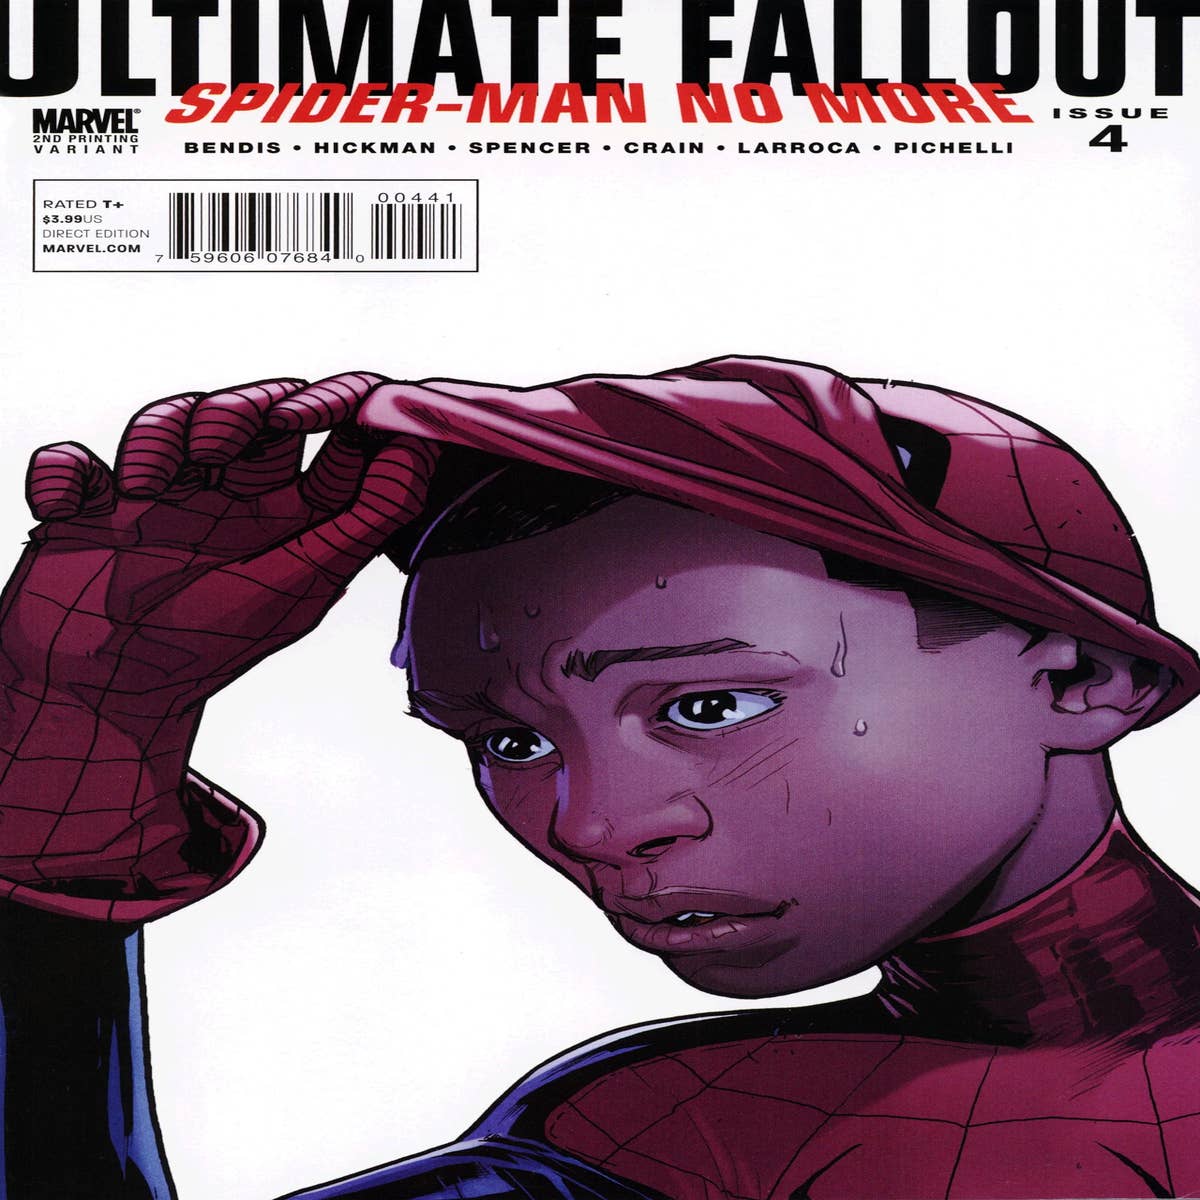 Spider-Man: Miles Morales: The comic book origins of every villain